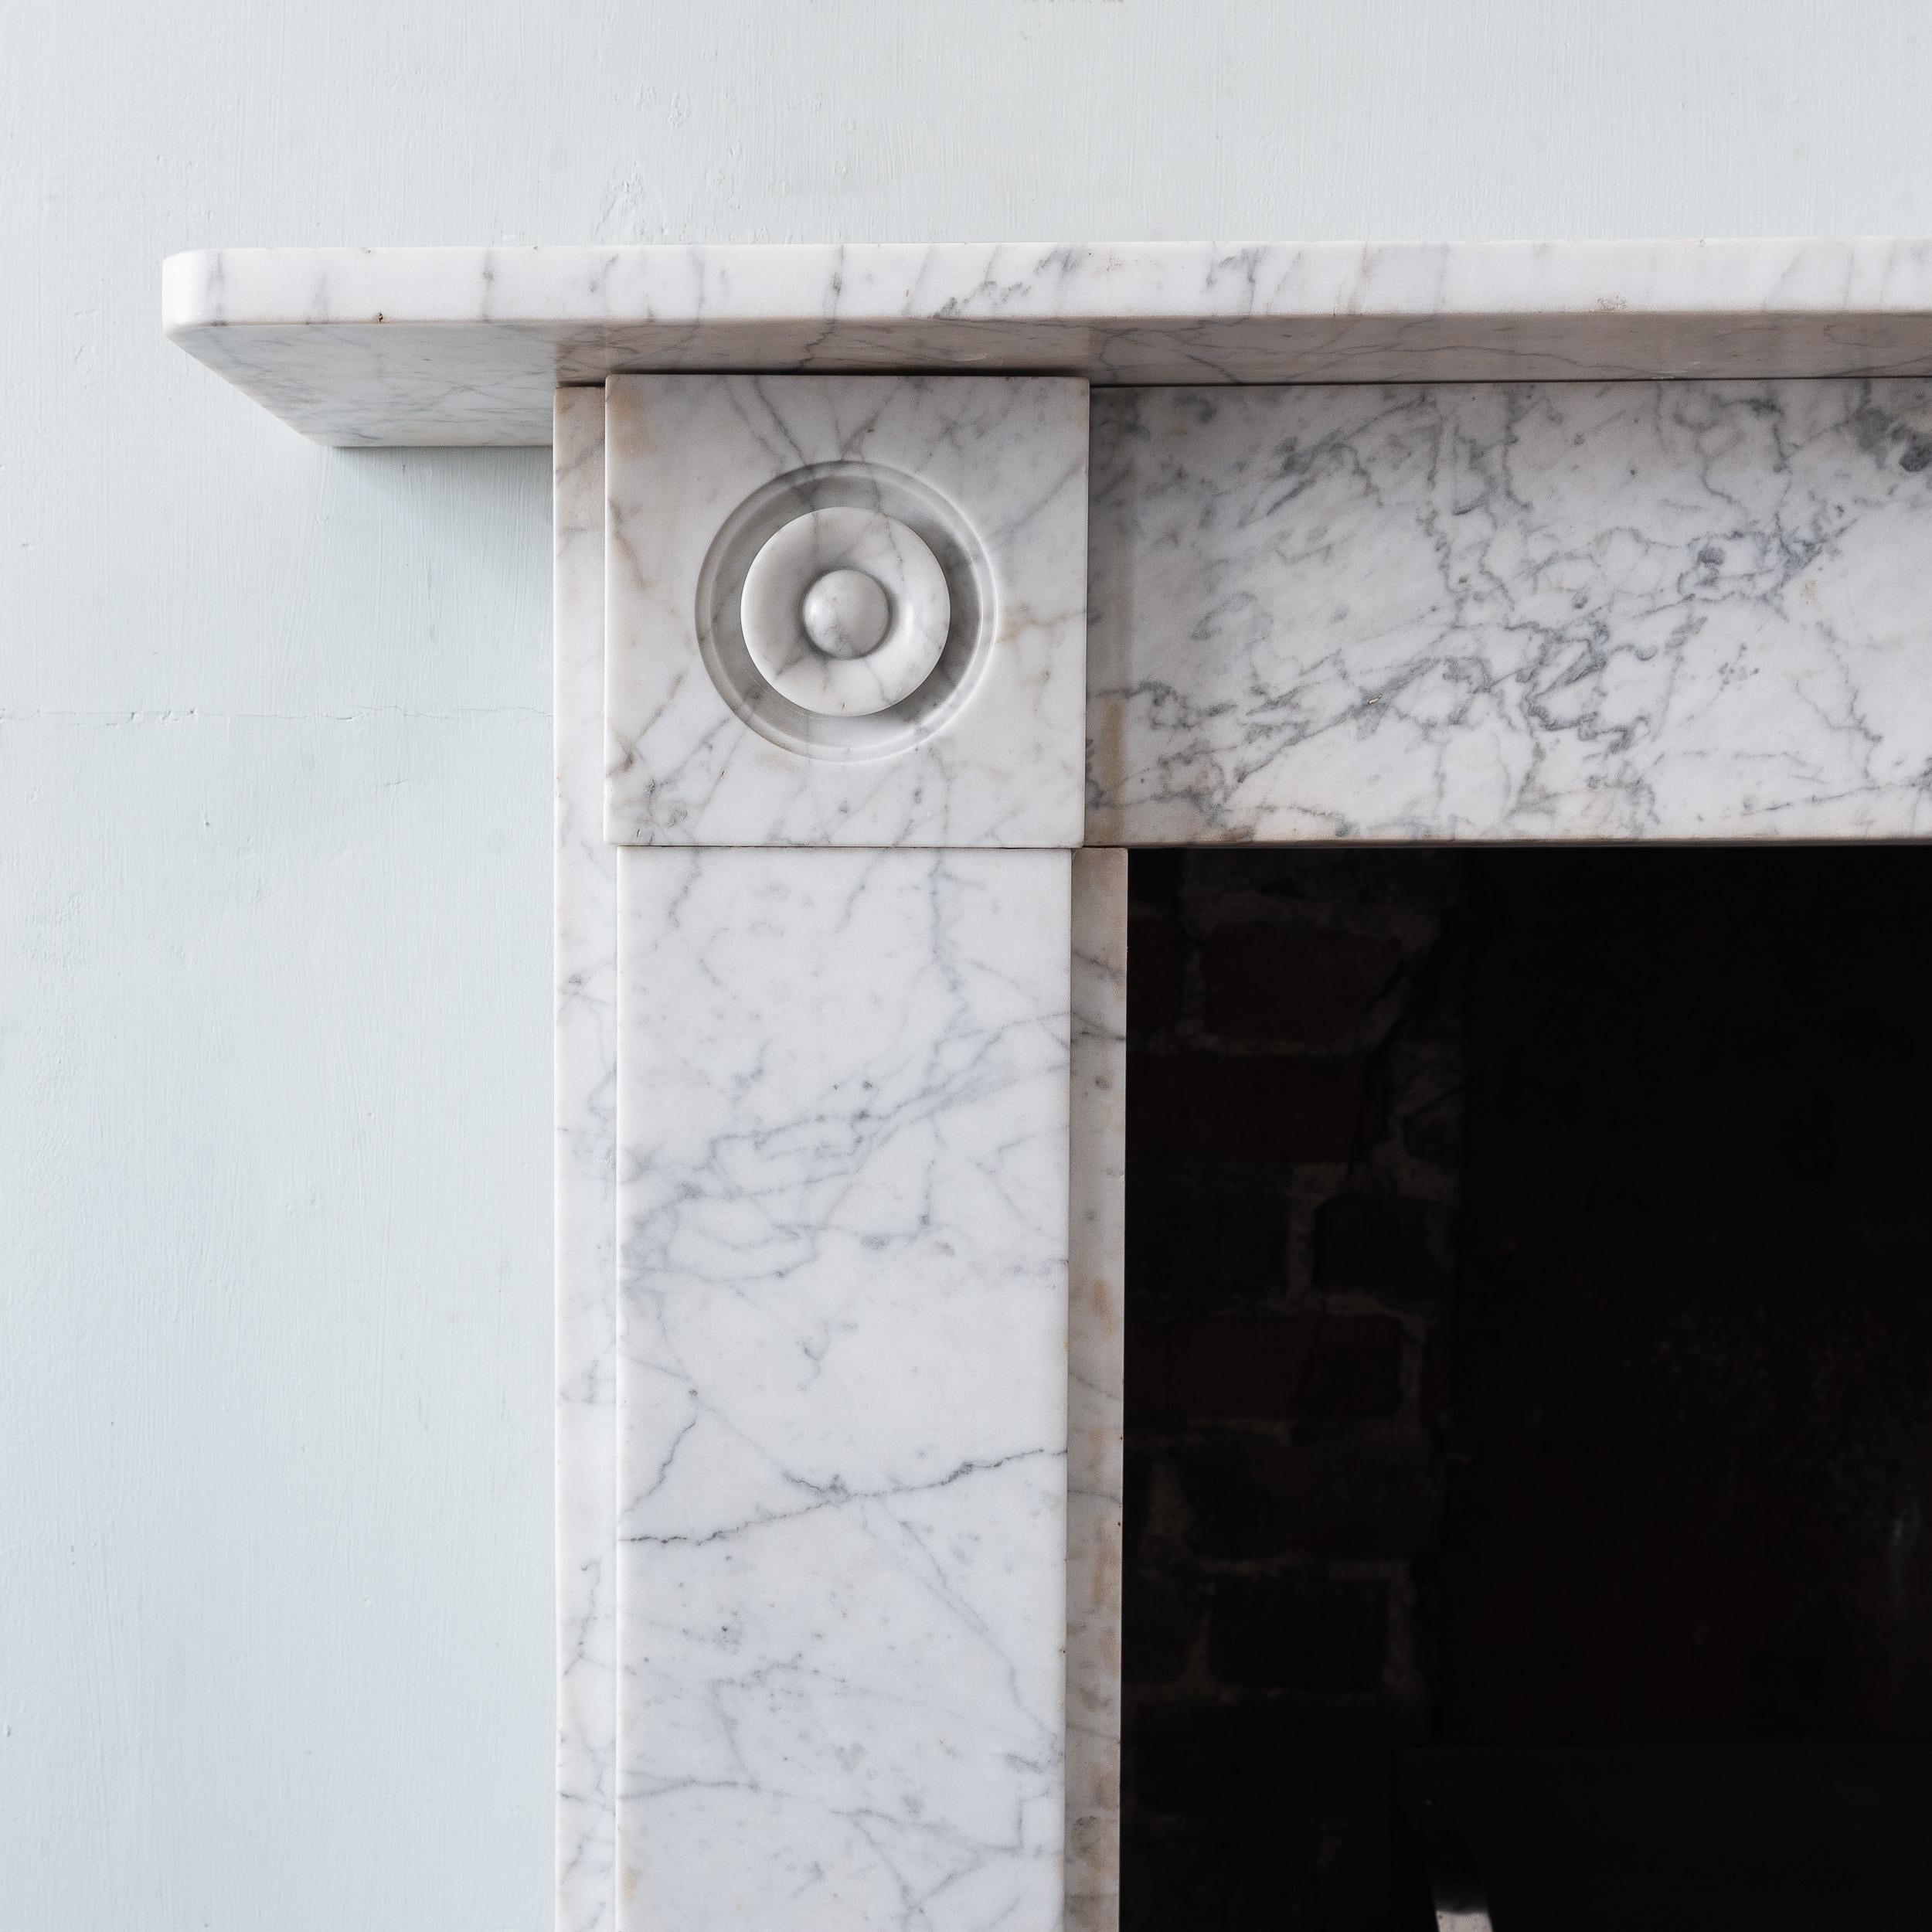 Nineteenth century English Regency period Carrara marble roundel fireplace, of simple plain form with deep-undercut bull's-eye corner-blocks.

Opening width 80 cm x 91 cm height, Outside jamb to jamb width 115 cm.

Ready for installation and use.